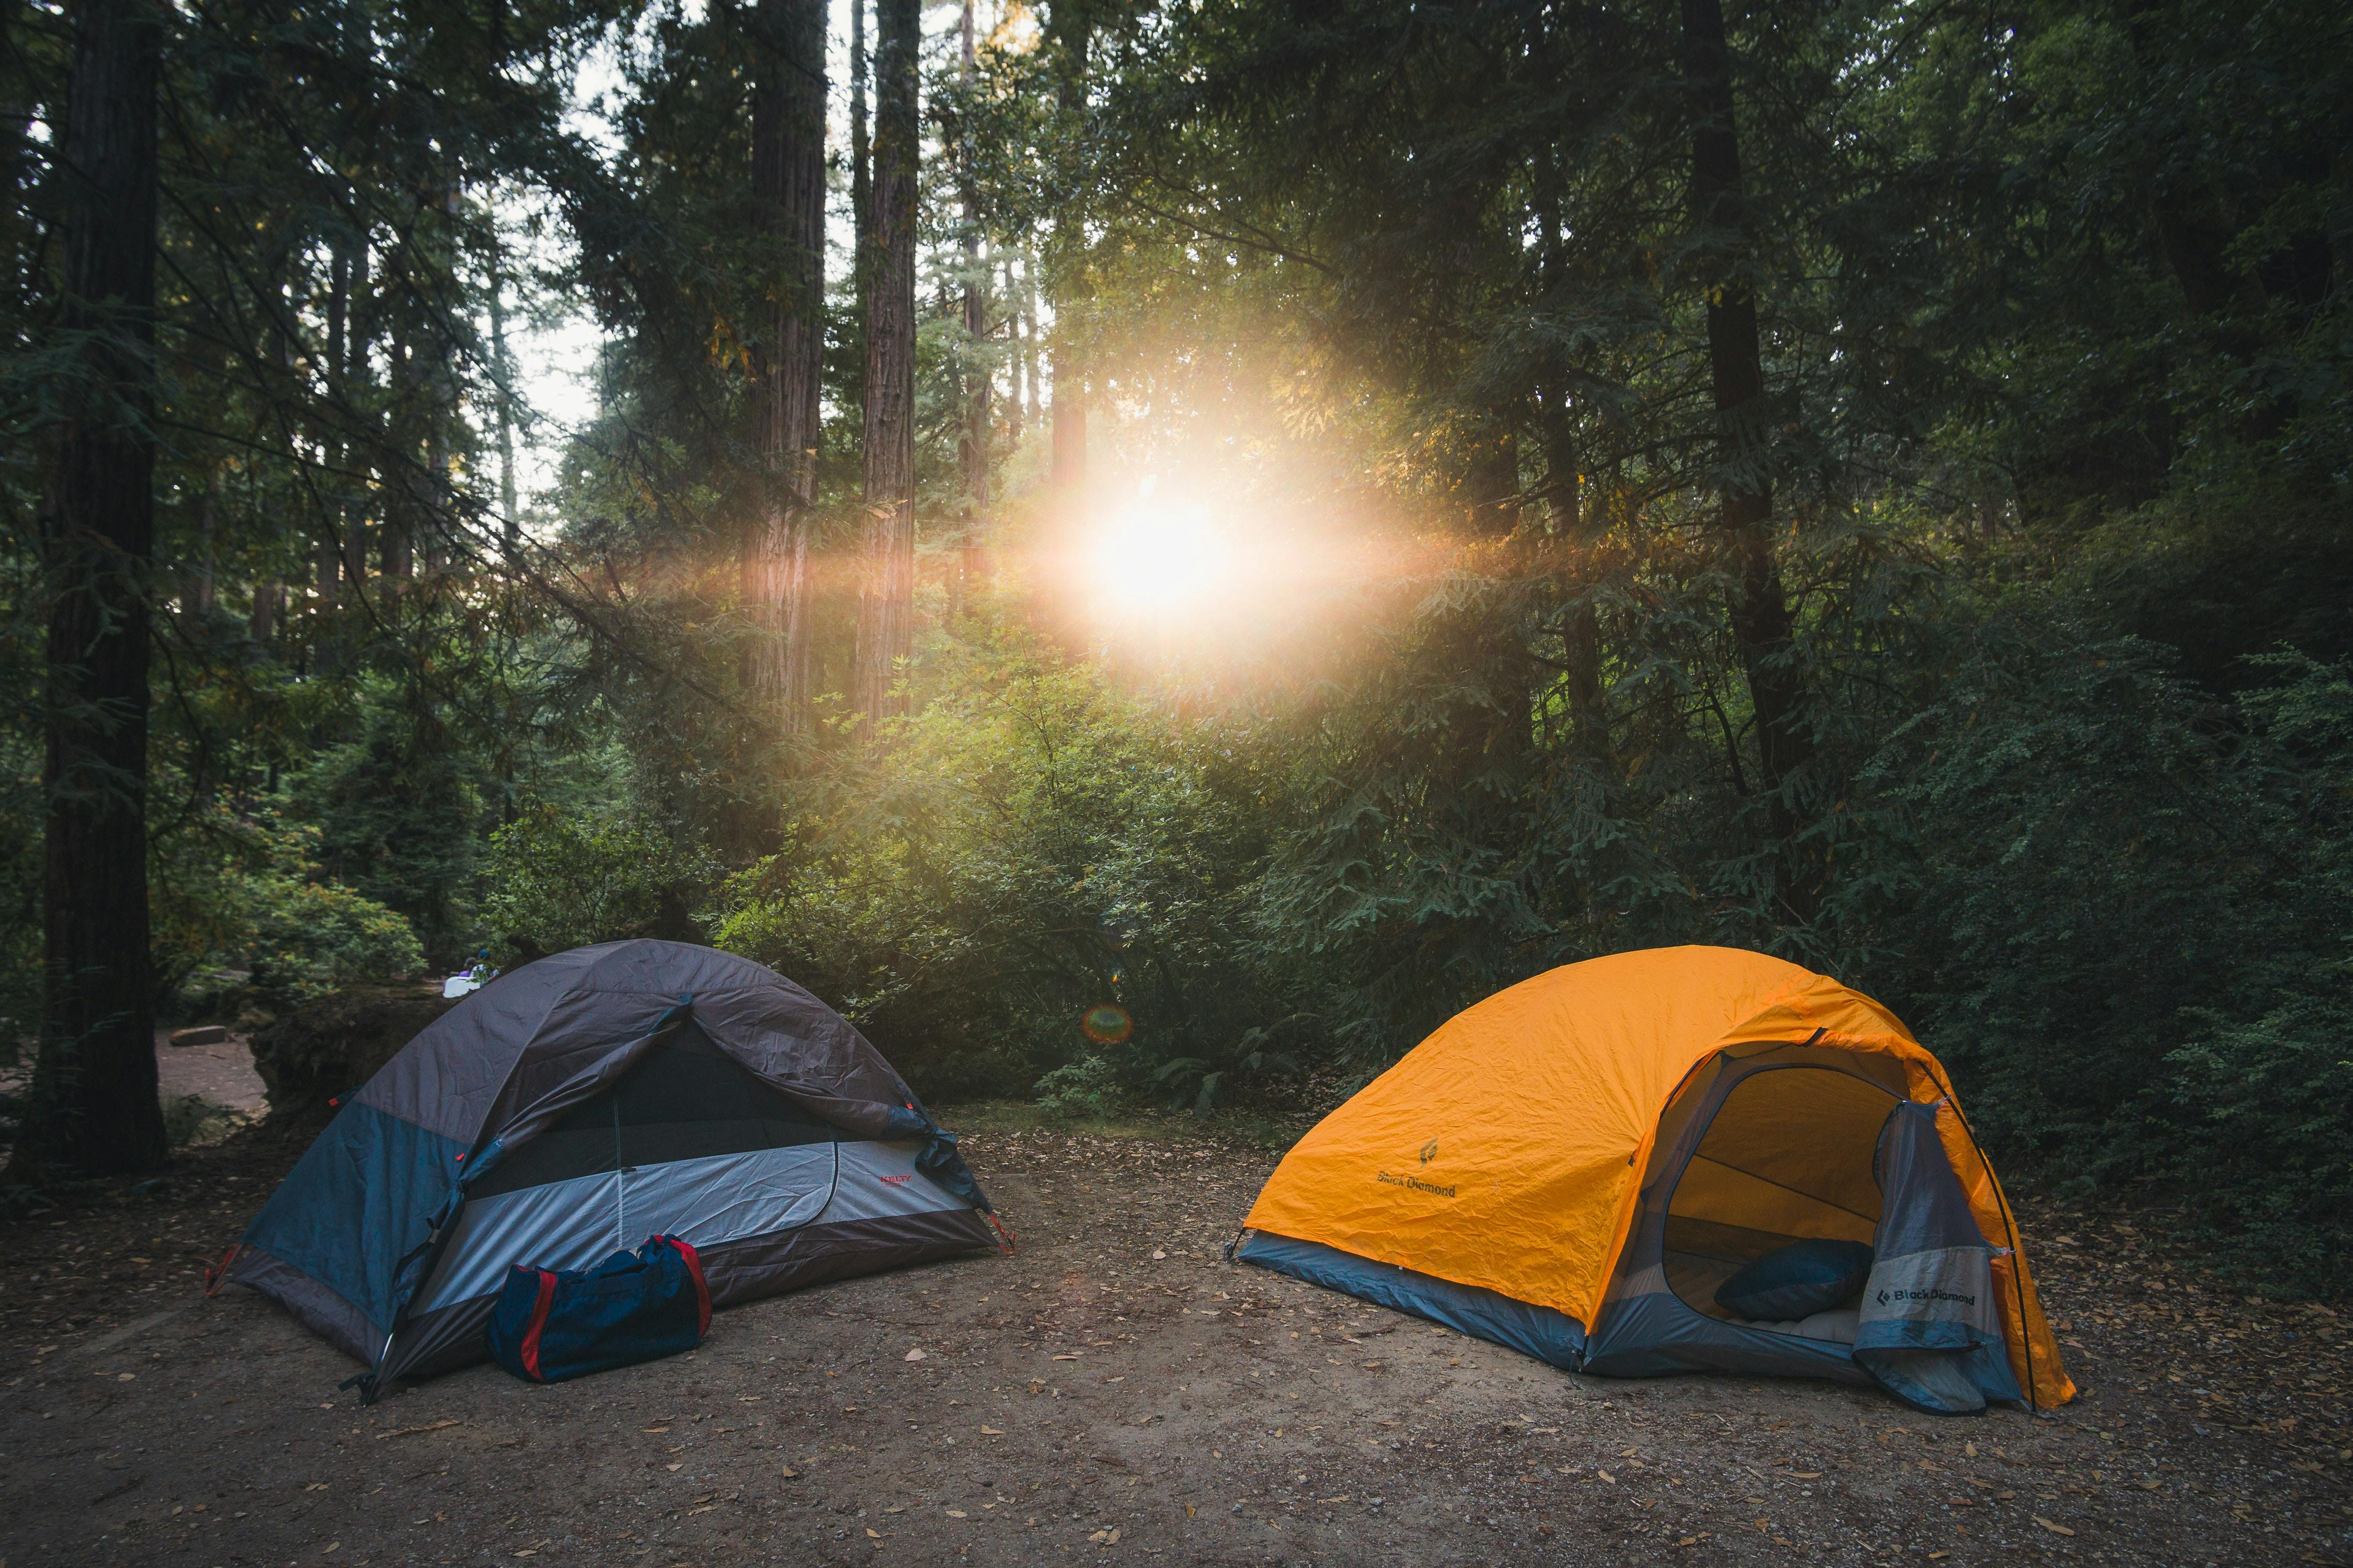 Two tents in a forest clearing at sunrise